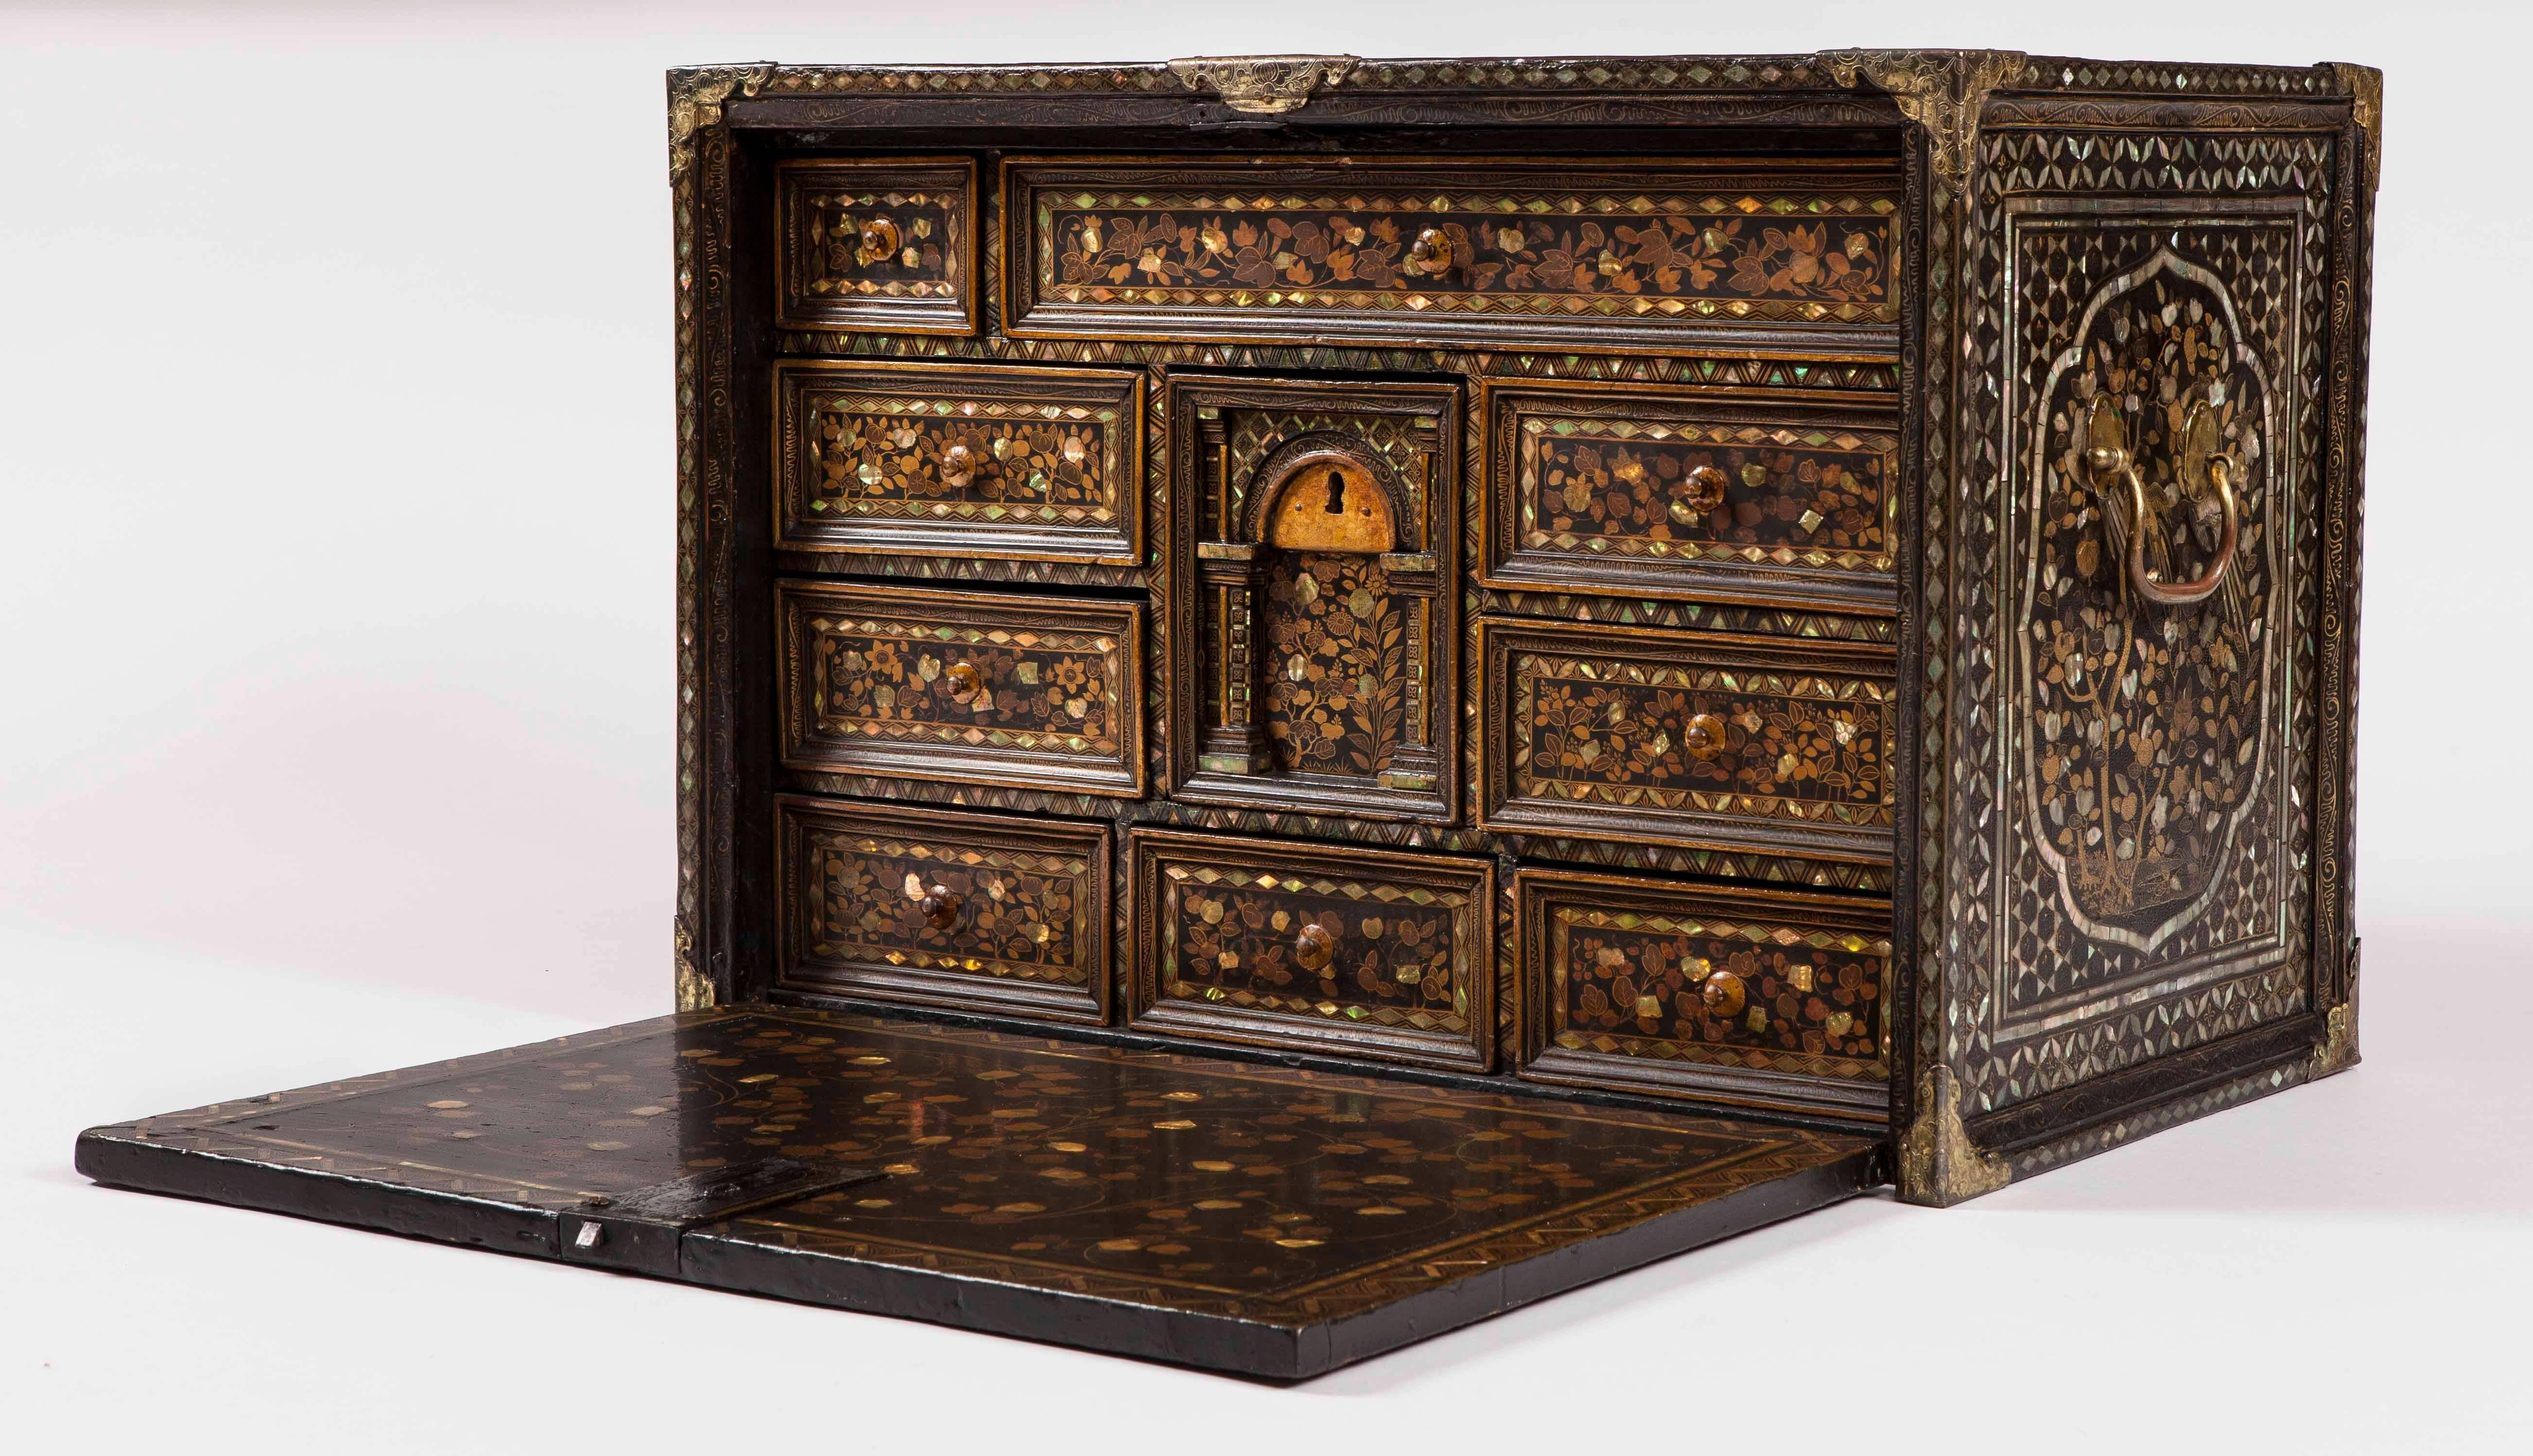 A 'Namban' export cabinet of the early 17th century

Of rectangular form, dressed with engraved metal guard straps at the angles, being comprehensively decorated with lacquer work, mother-of-pearl and gilt; having a hinged fall front, with an